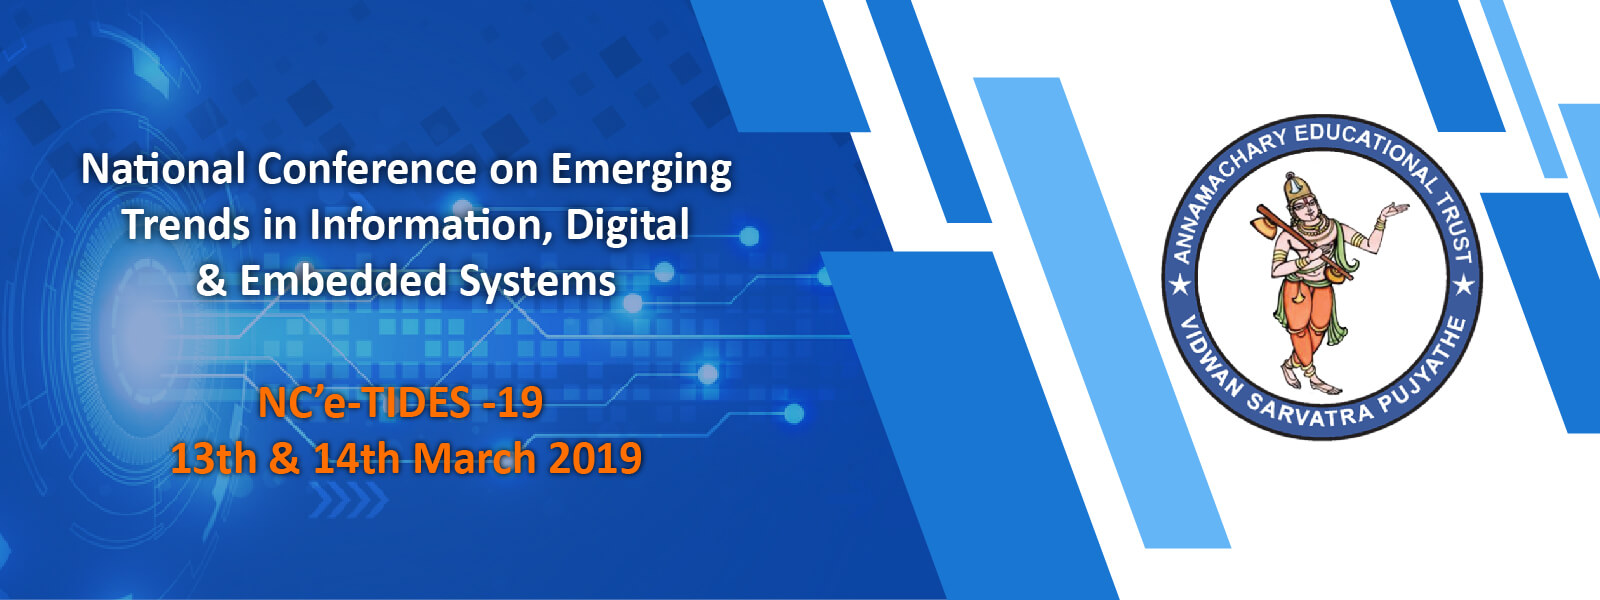 AITS, Rajampet to Host National Conference on Emerging Trends in Information, Digital & Embedded Systems on March 13 & 1